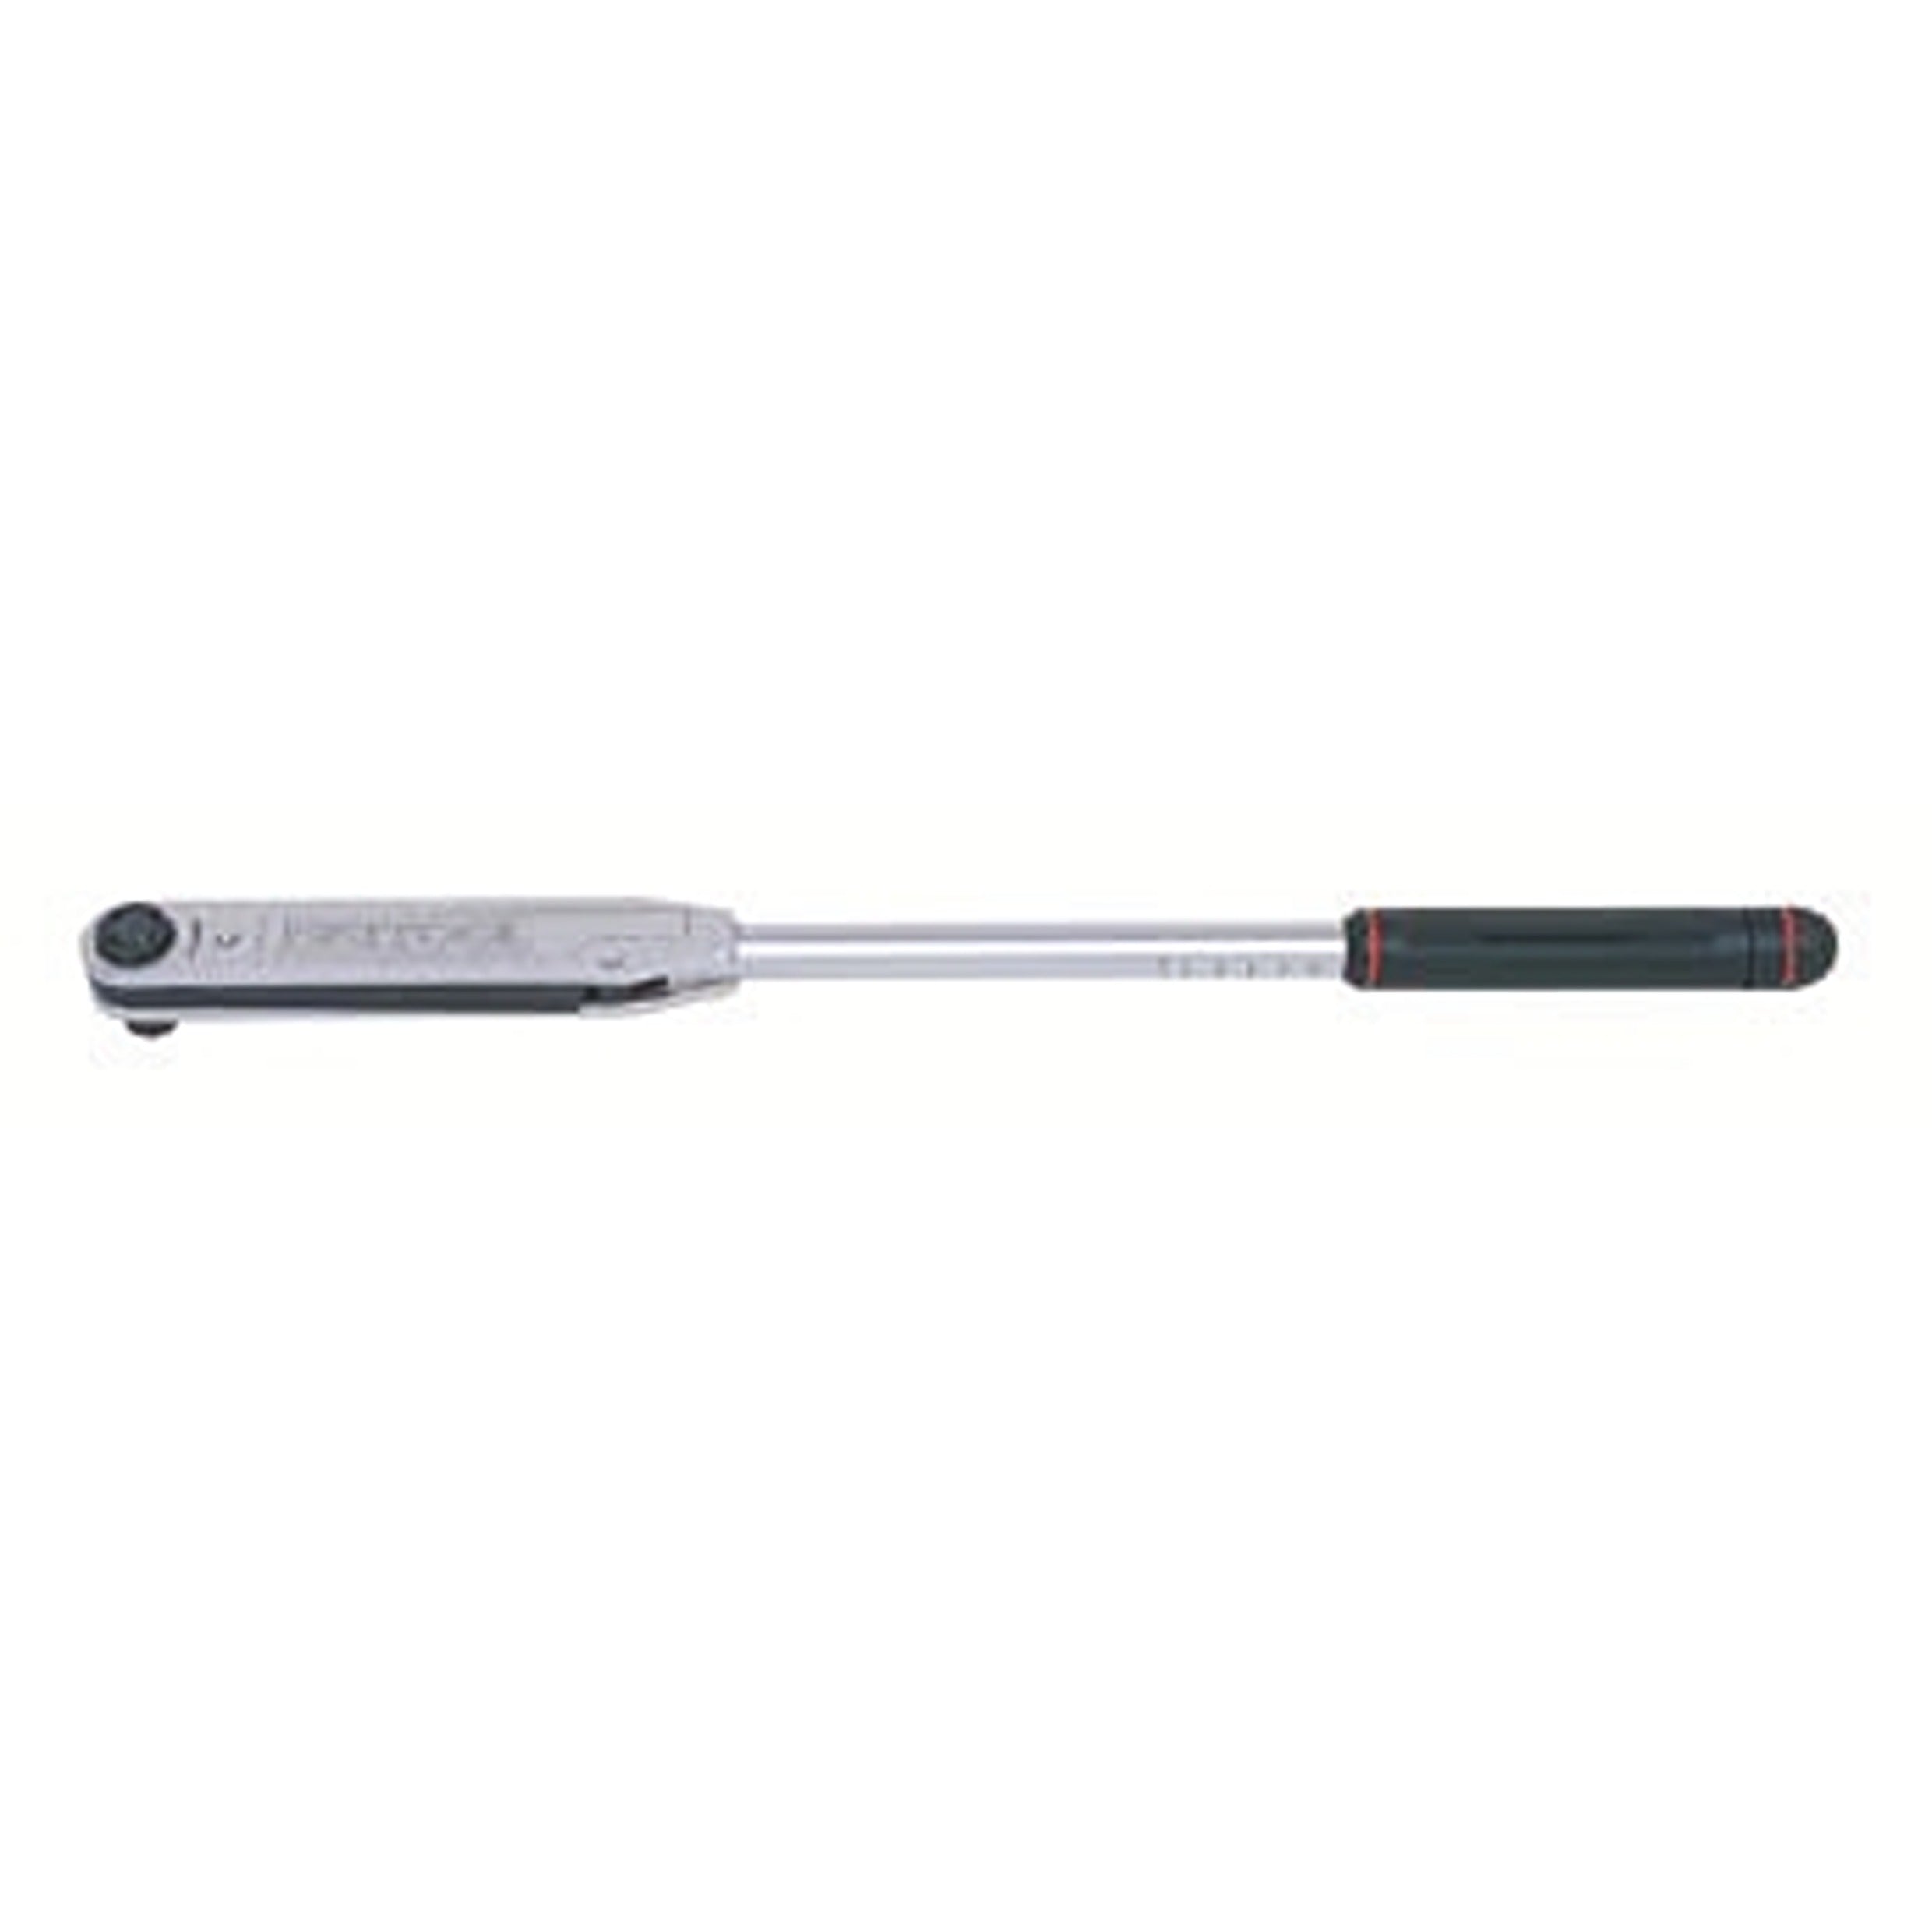 BRITOOL EVT600A 1/2" Torque Wrench Classic Mechanical 12-68 Nm - Premium 1/2" Torque Wrench from BRITOOL - Shop now at Yew Aik.